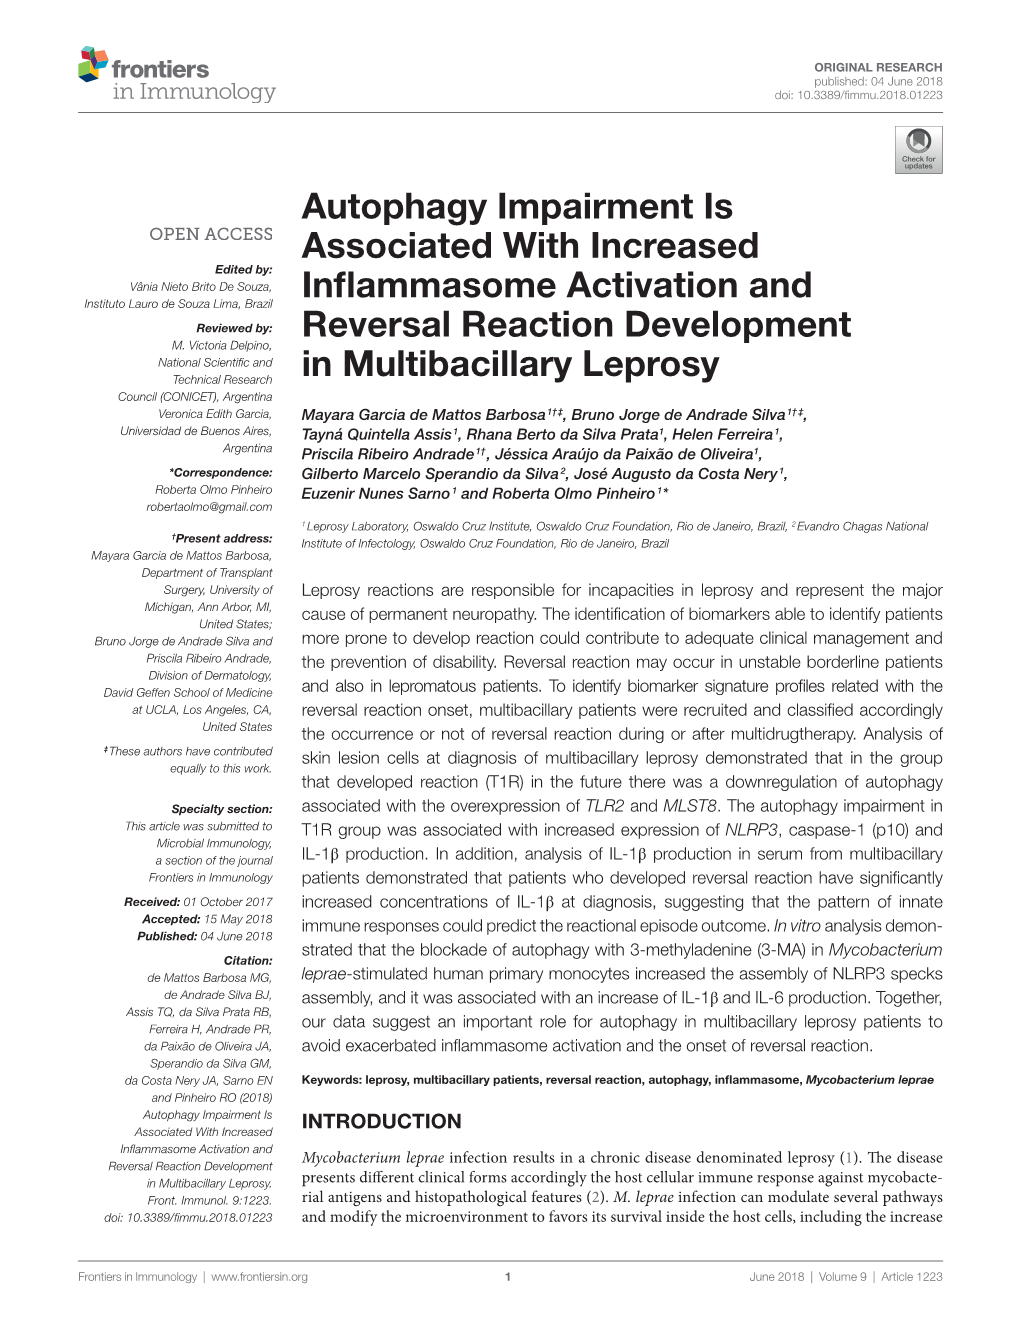 Autophagy Impairment Is Associated With